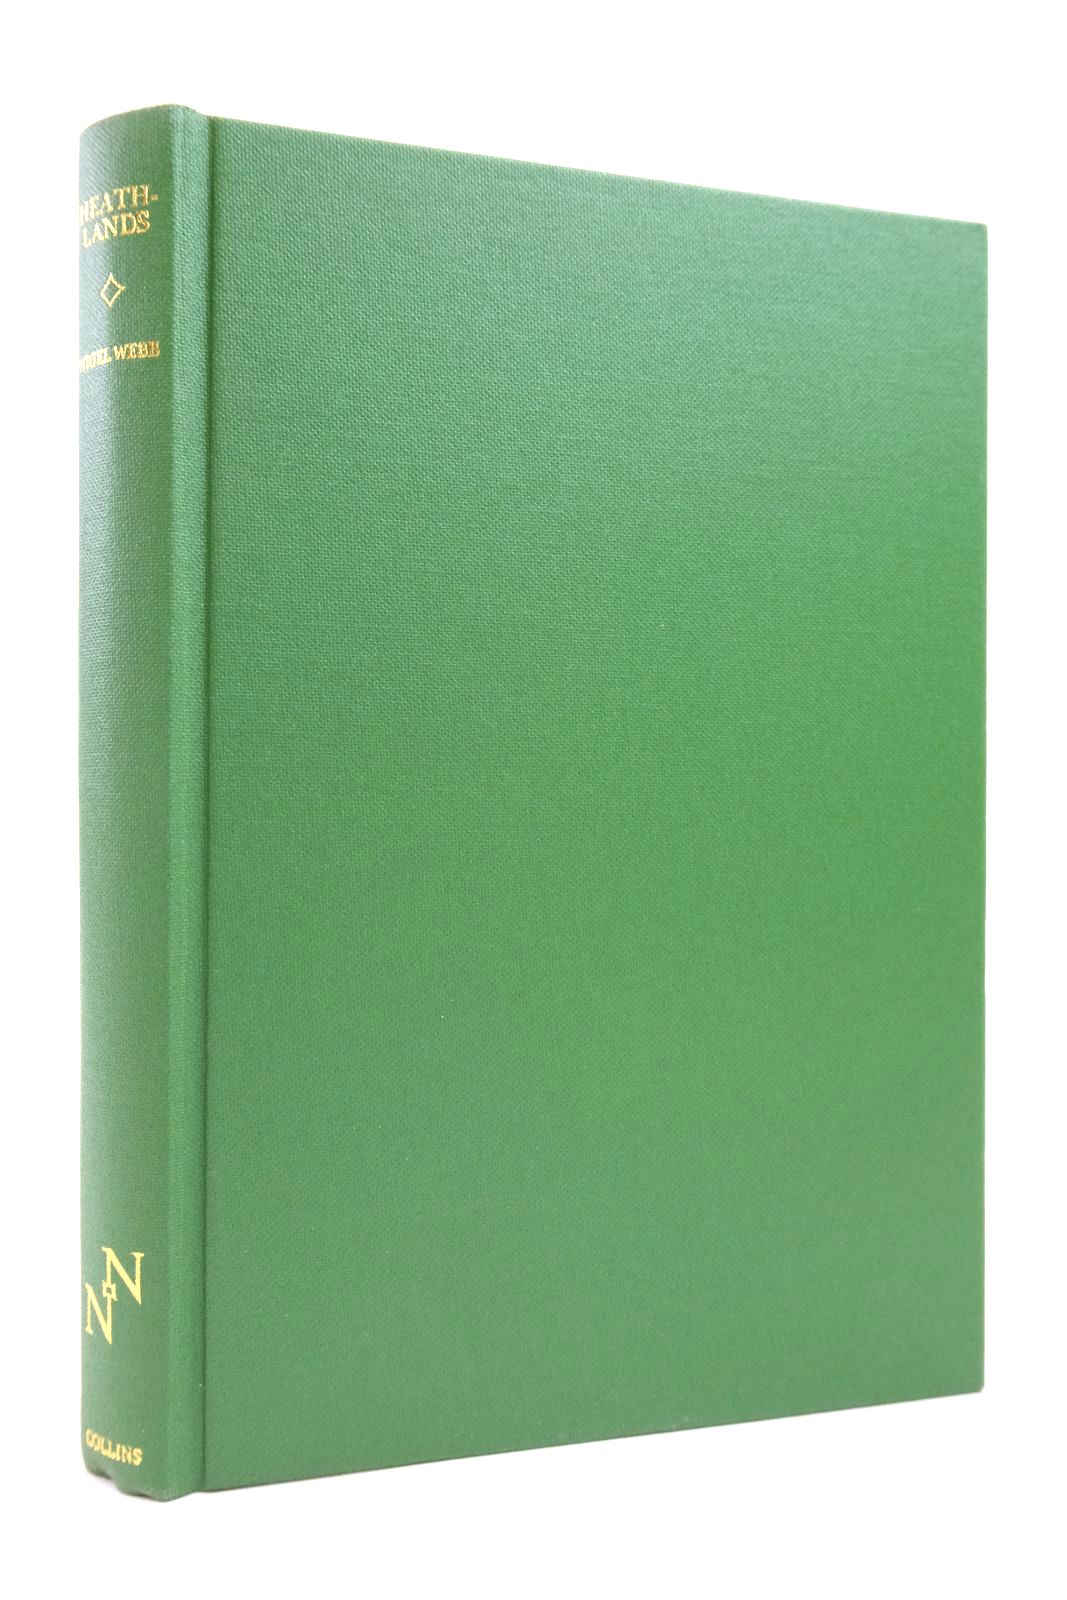 Photo of HEATHLANDS (NN 72) written by Webb, Nigel published by Collins (STOCK CODE: 2140604)  for sale by Stella & Rose's Books